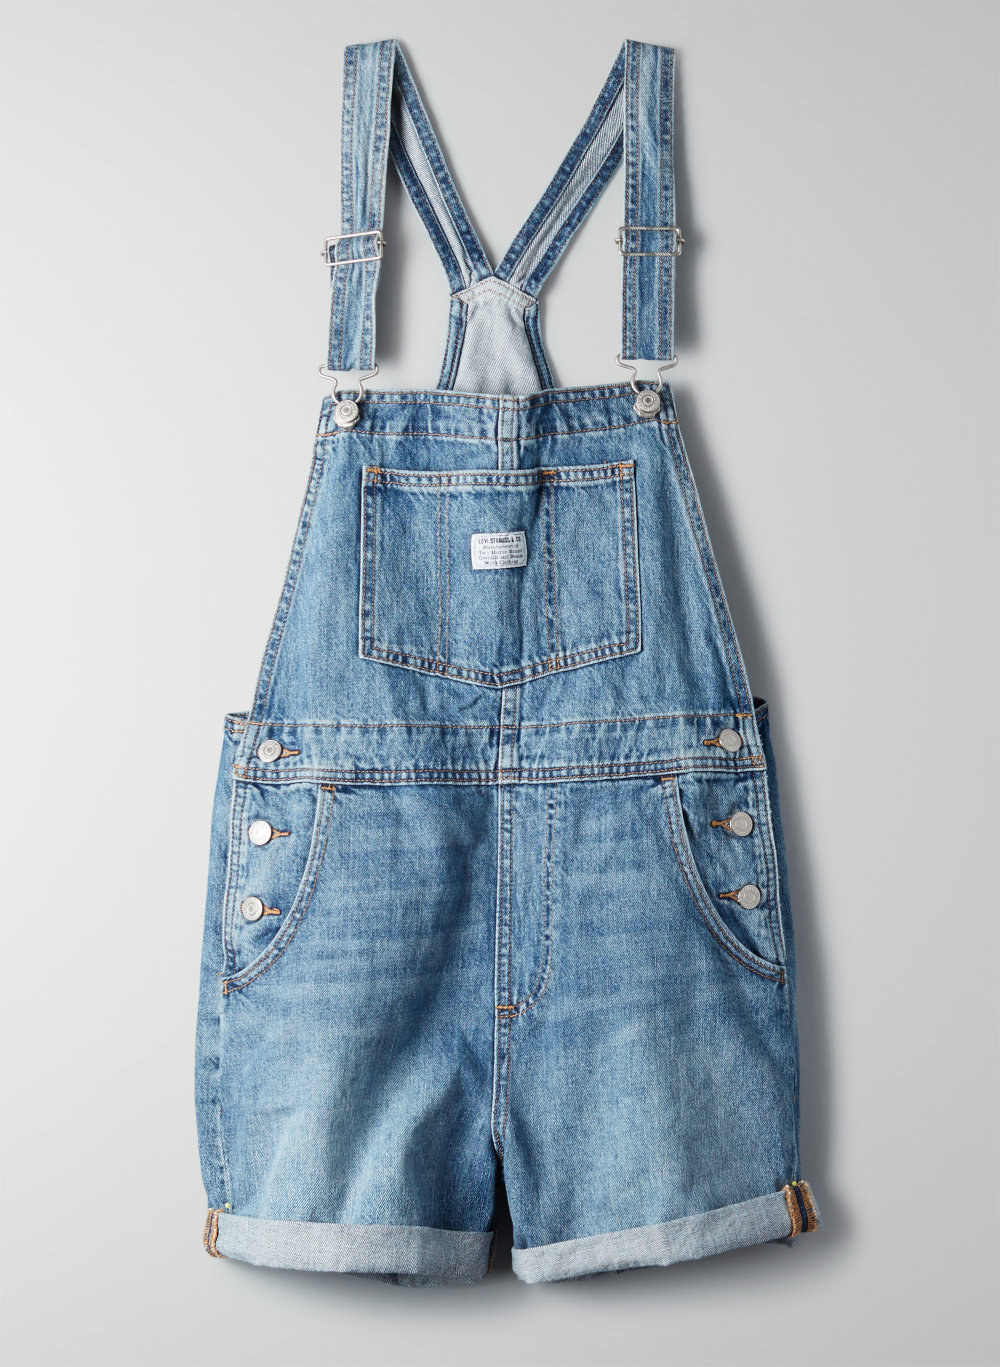 vintage levi overall shorts